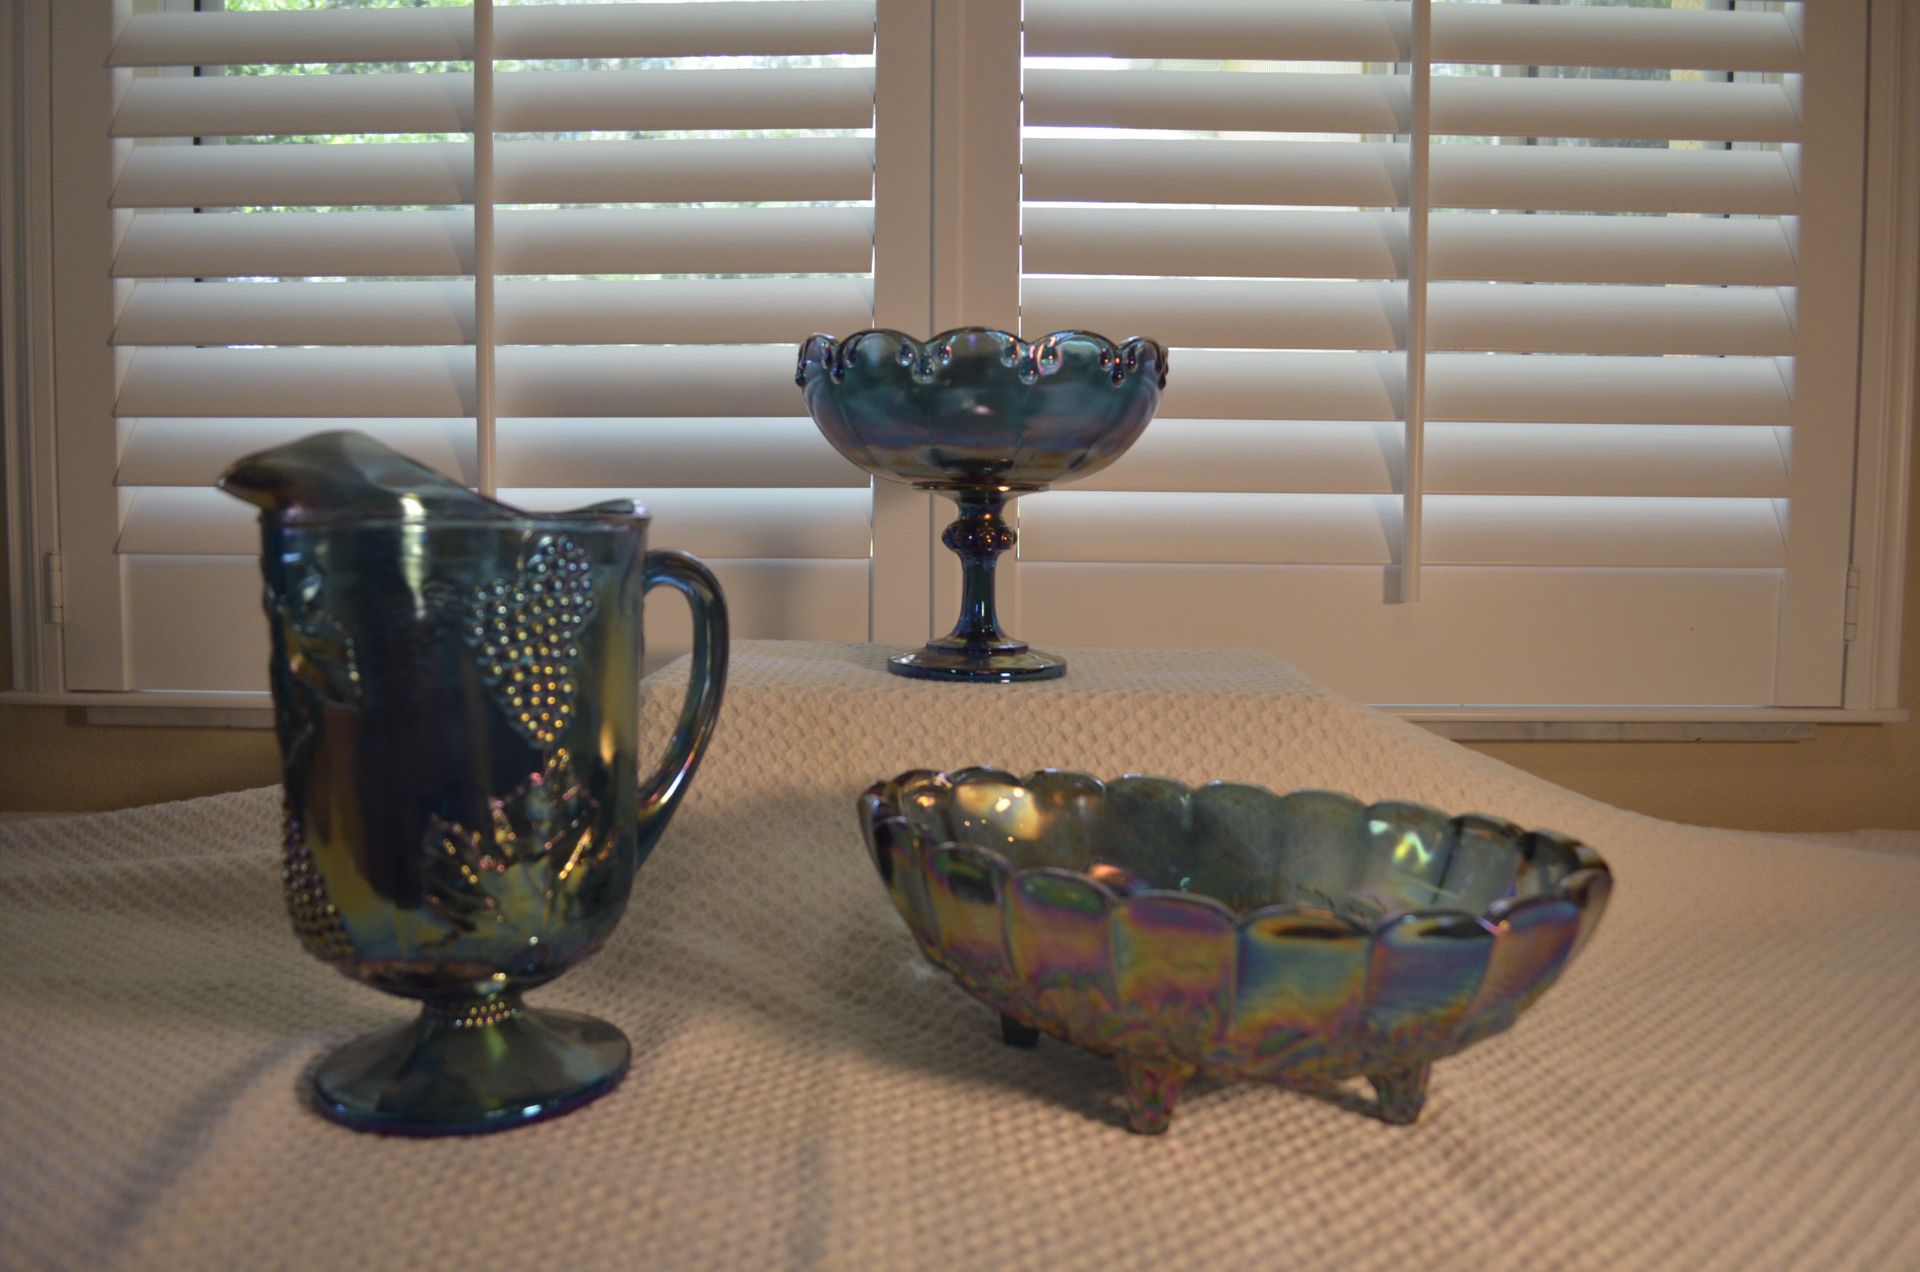 Carnival glass collection (6 pieces)